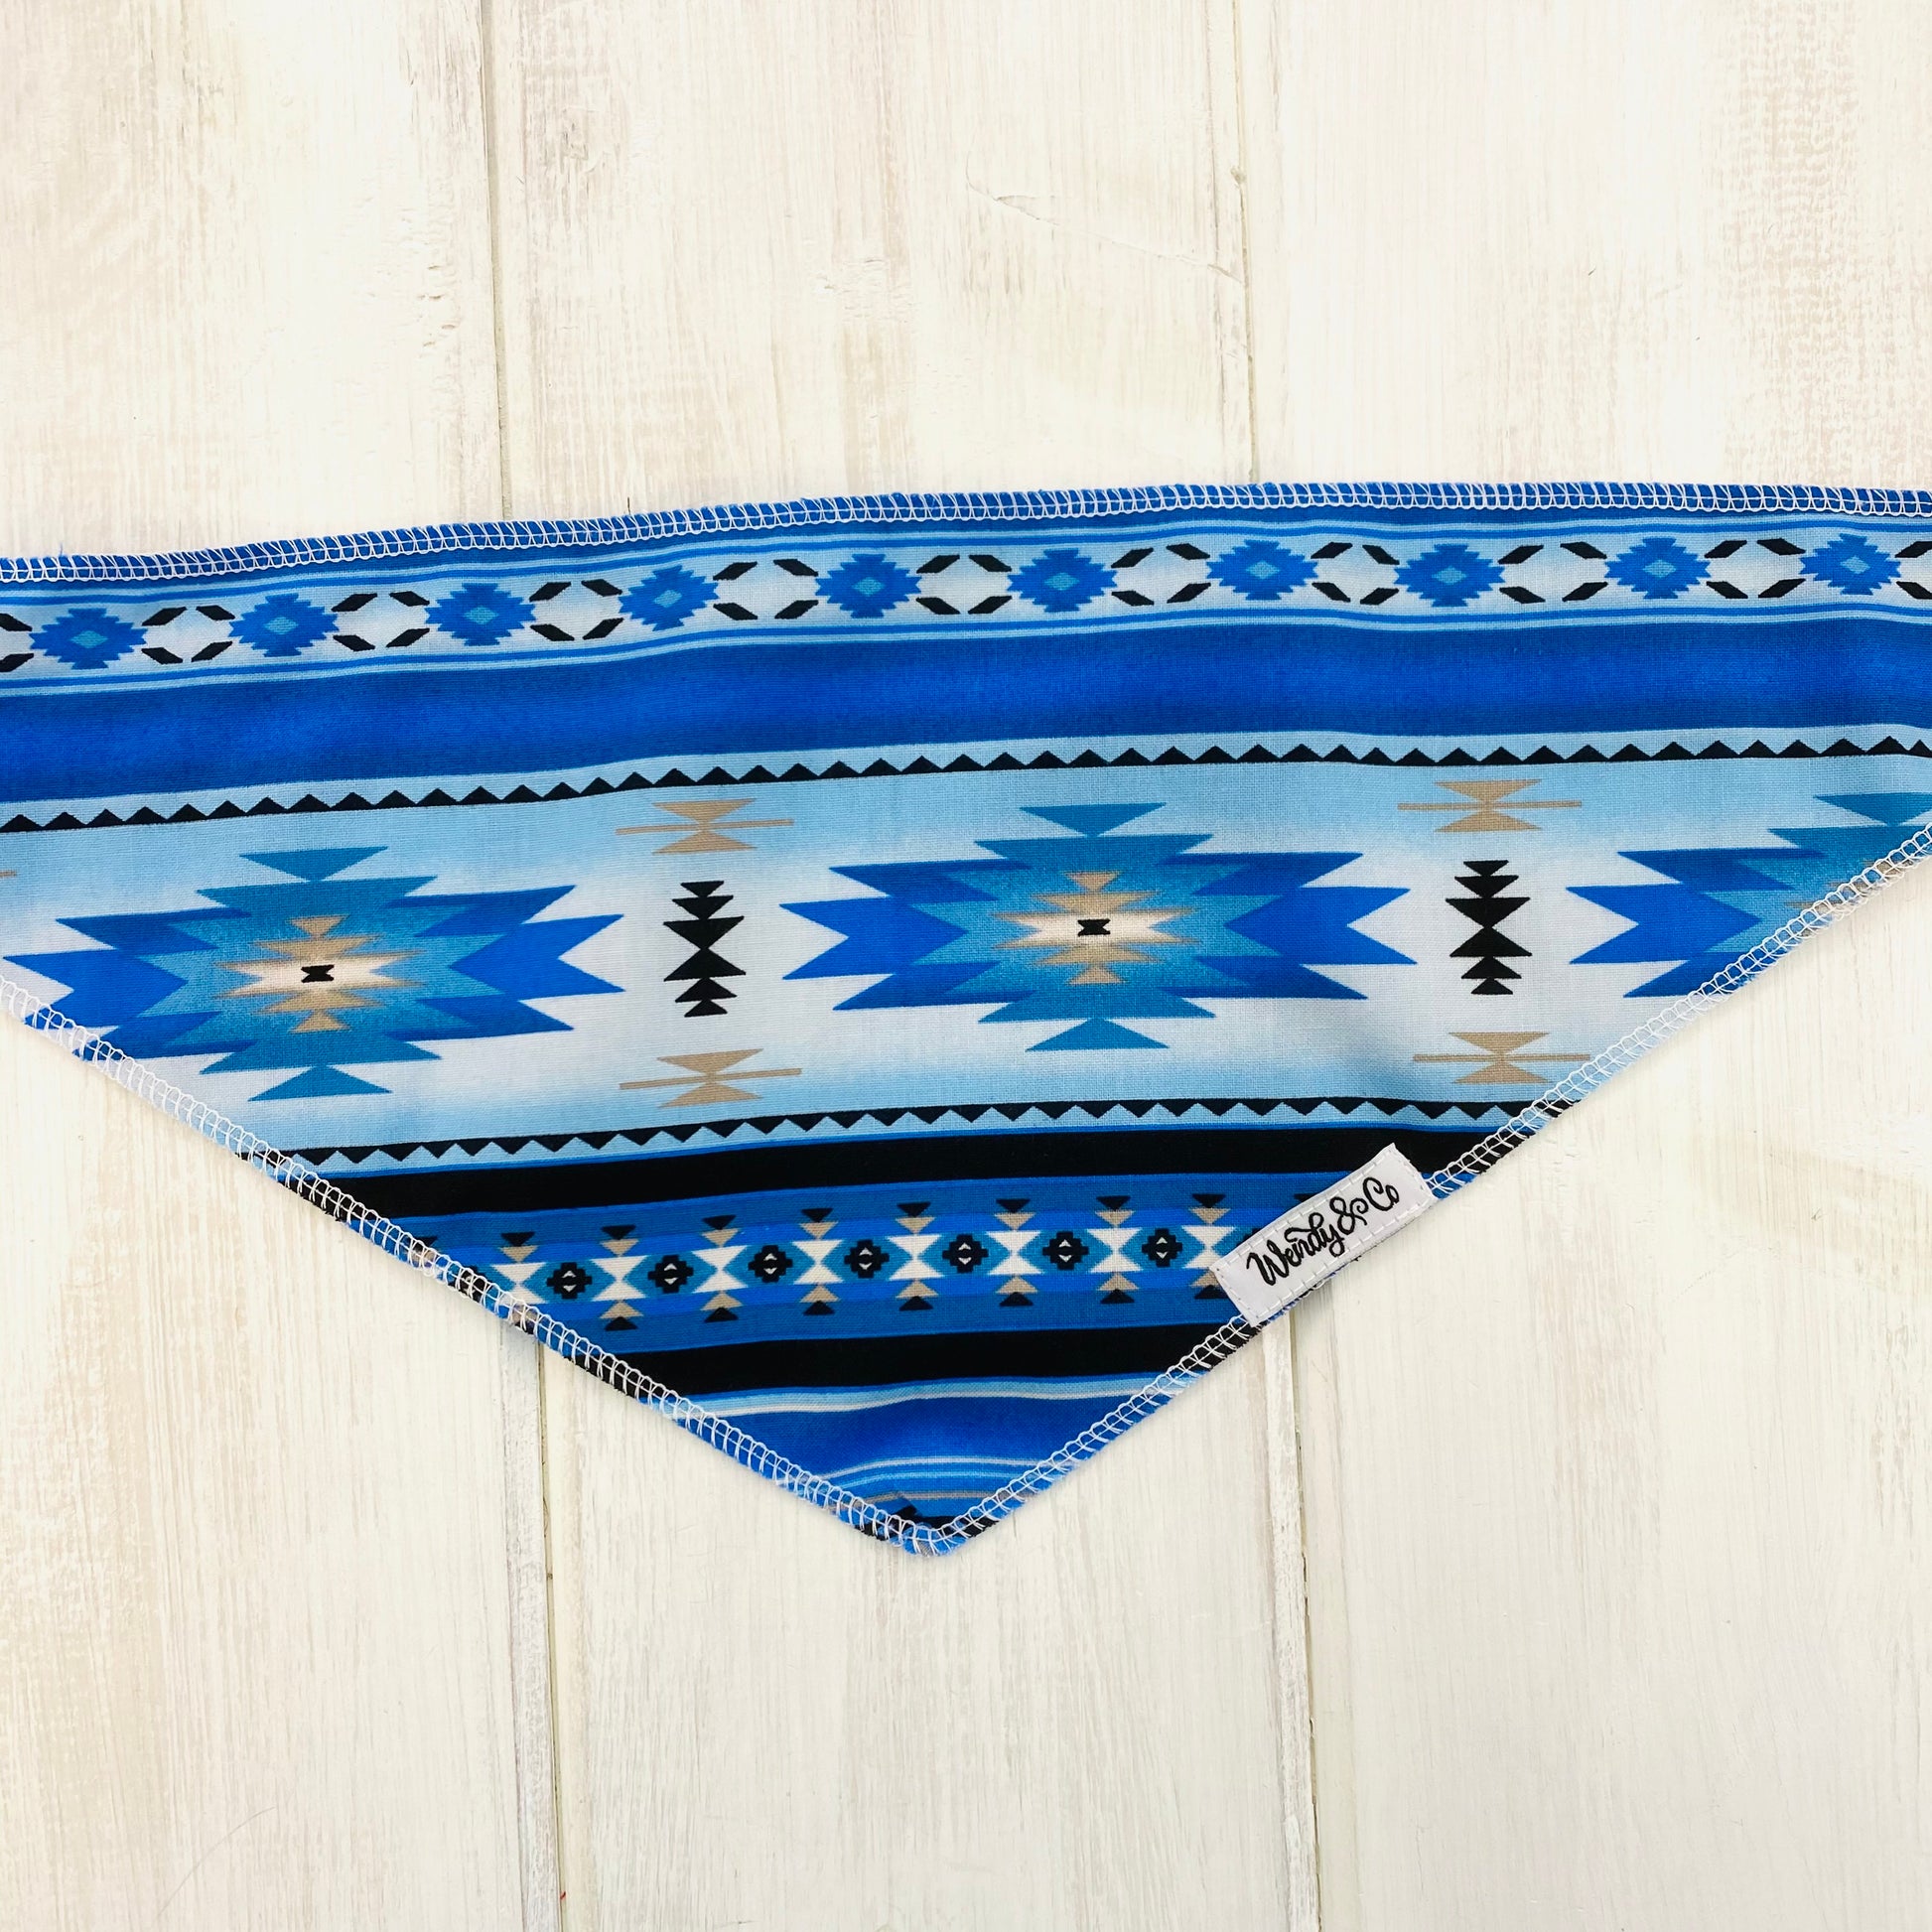 Tie on dog bandana in southwest print in shades of blue.